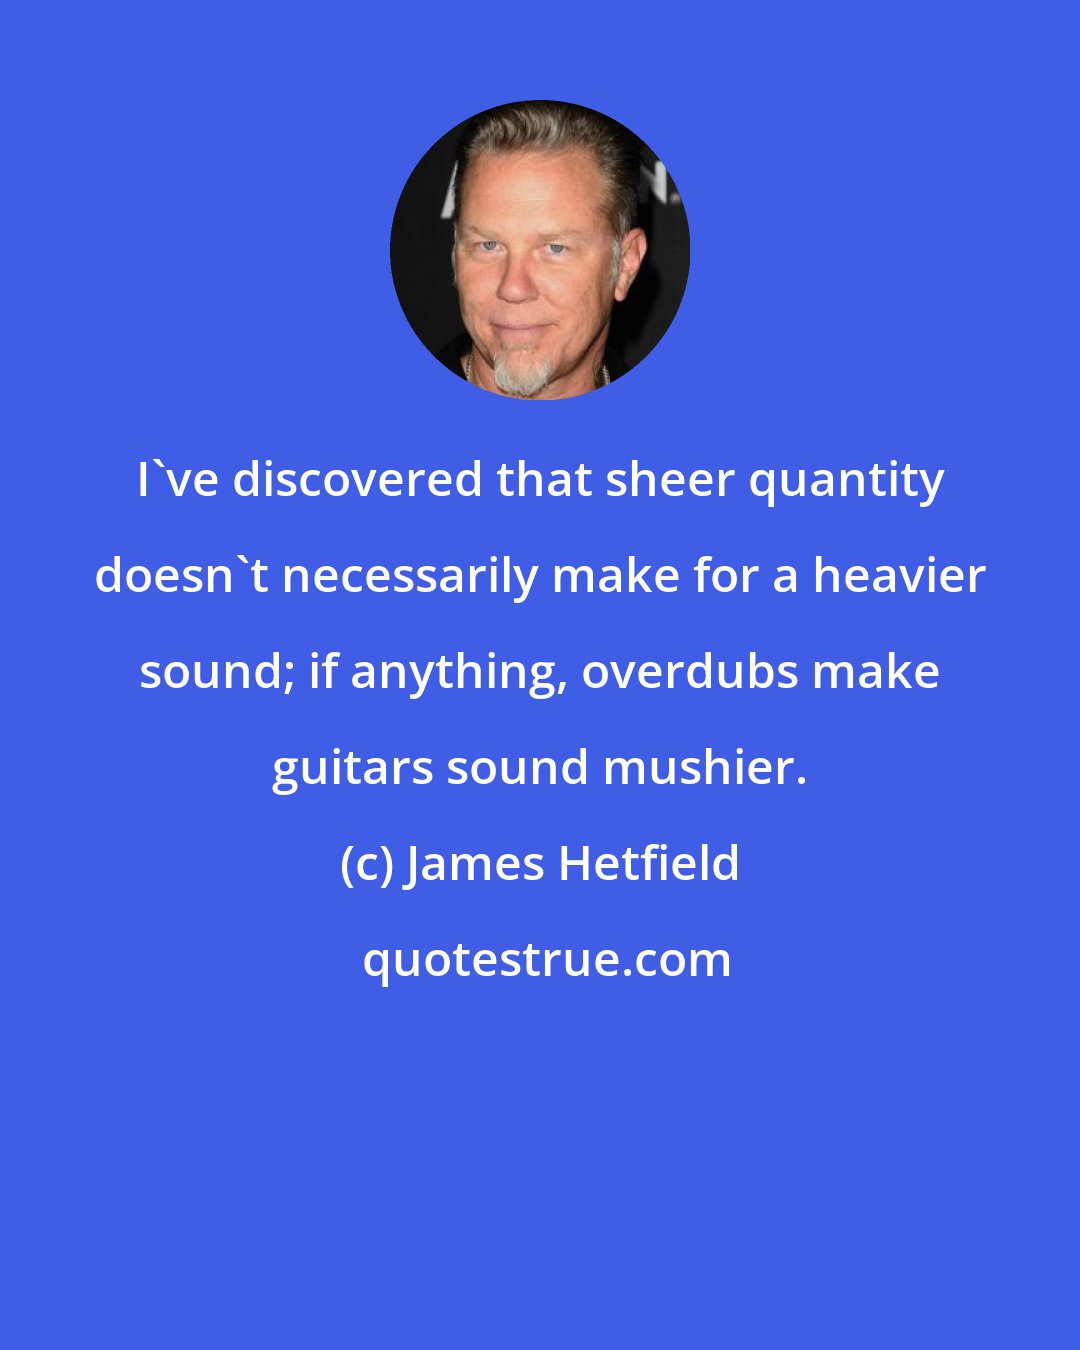 James Hetfield: I've discovered that sheer quantity doesn't necessarily make for a heavier sound; if anything, overdubs make guitars sound mushier.